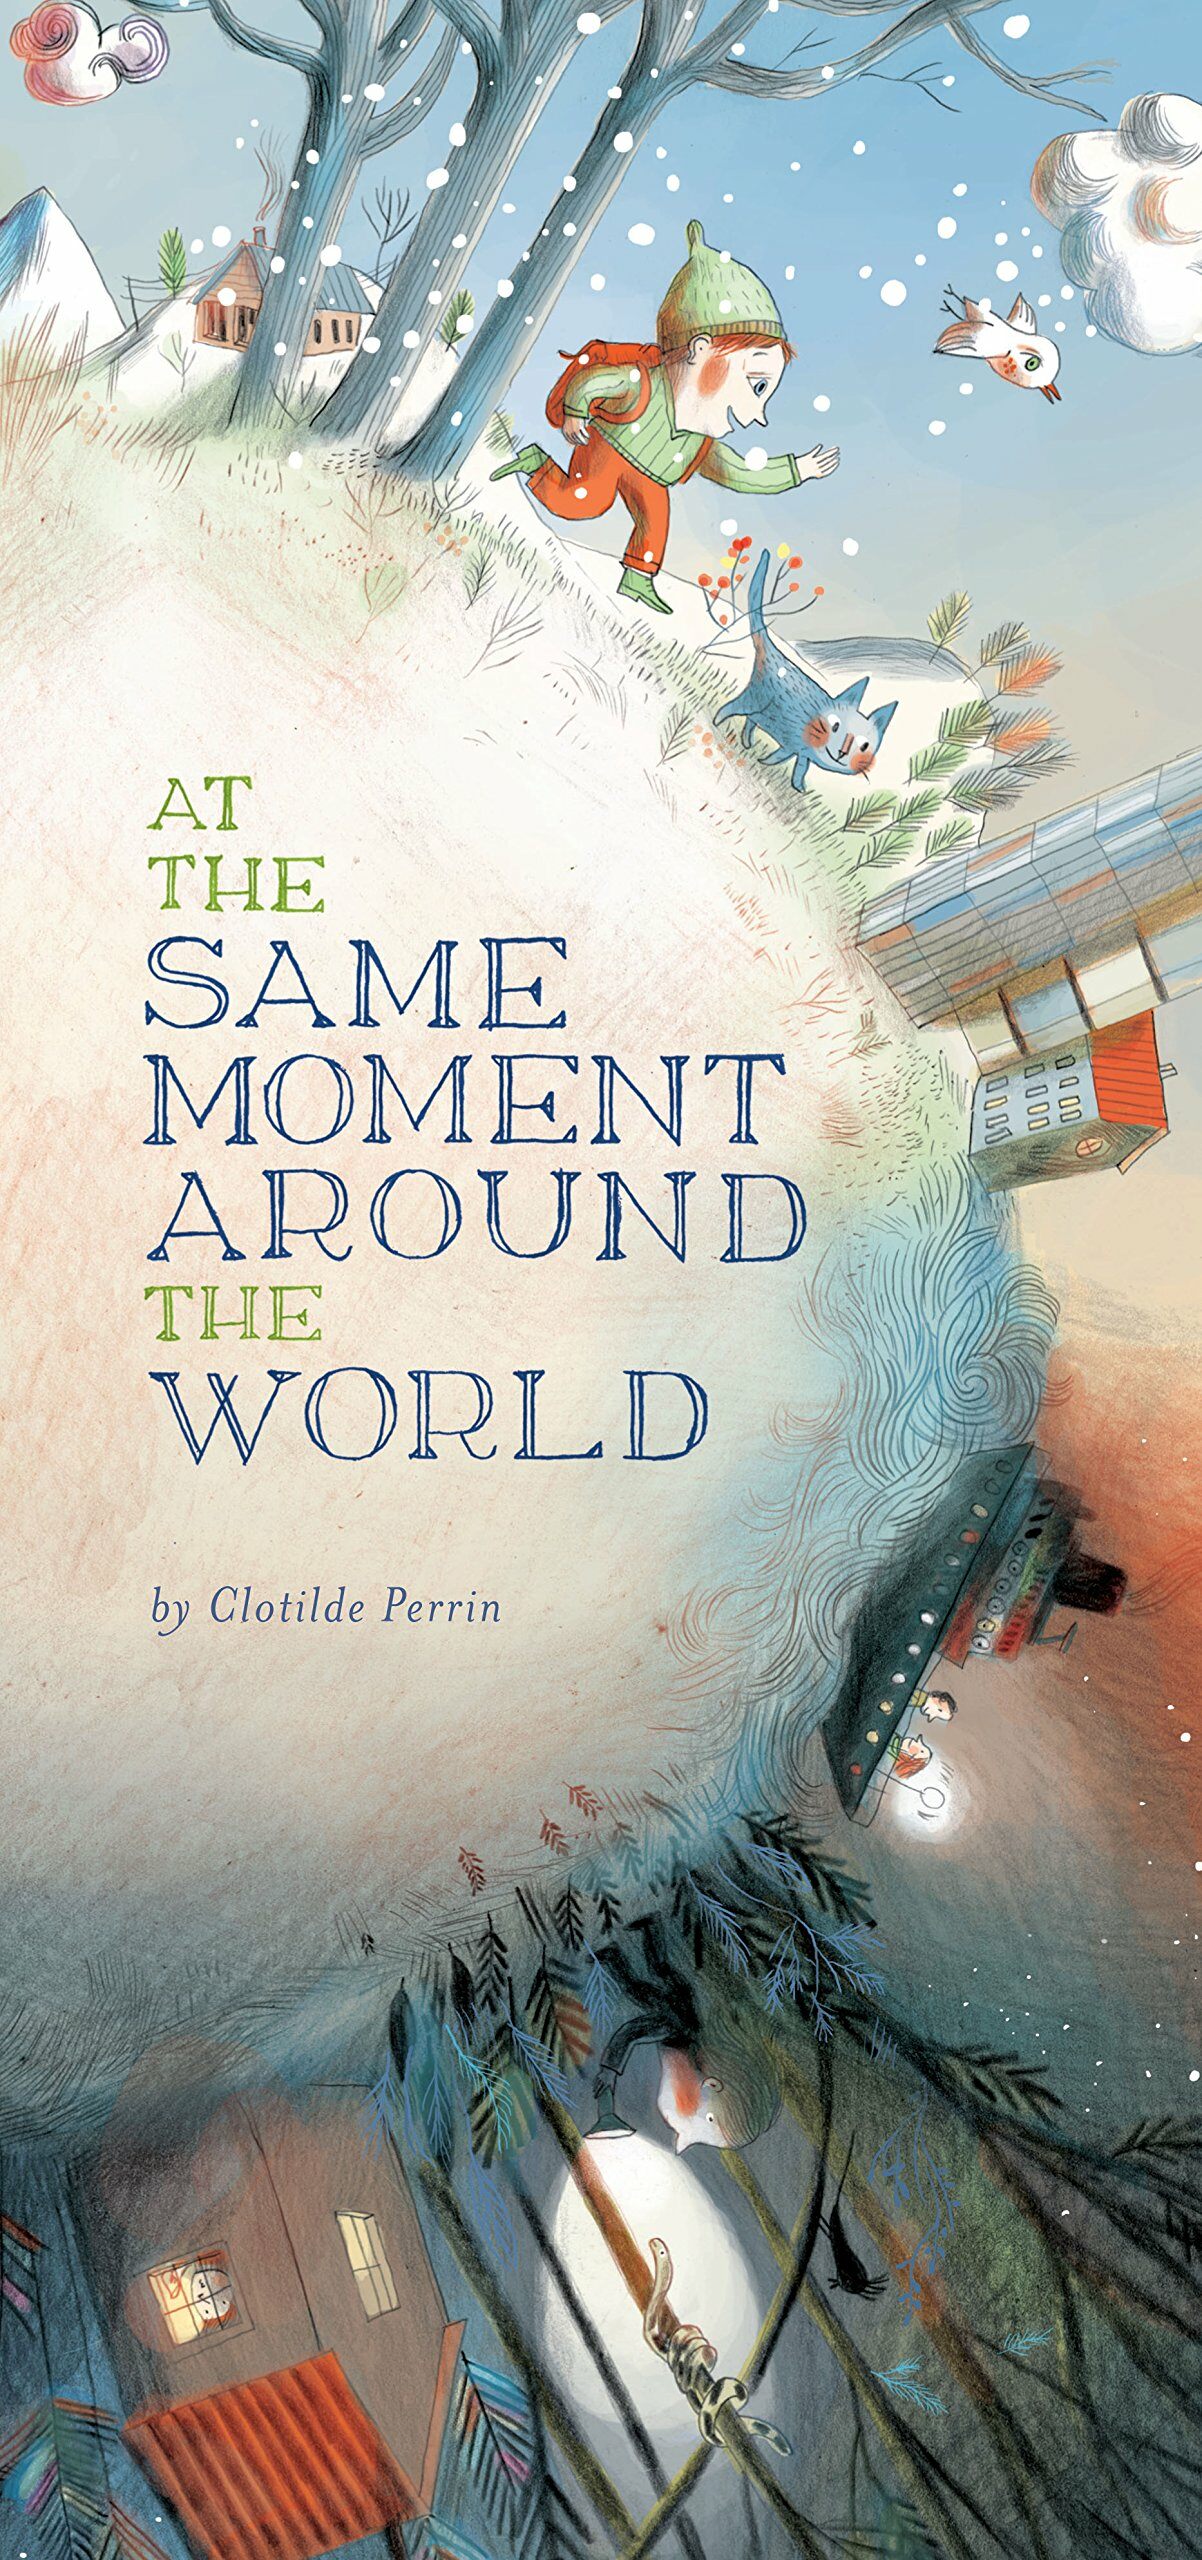 At the Same Moment, Around the World (Hardcover)